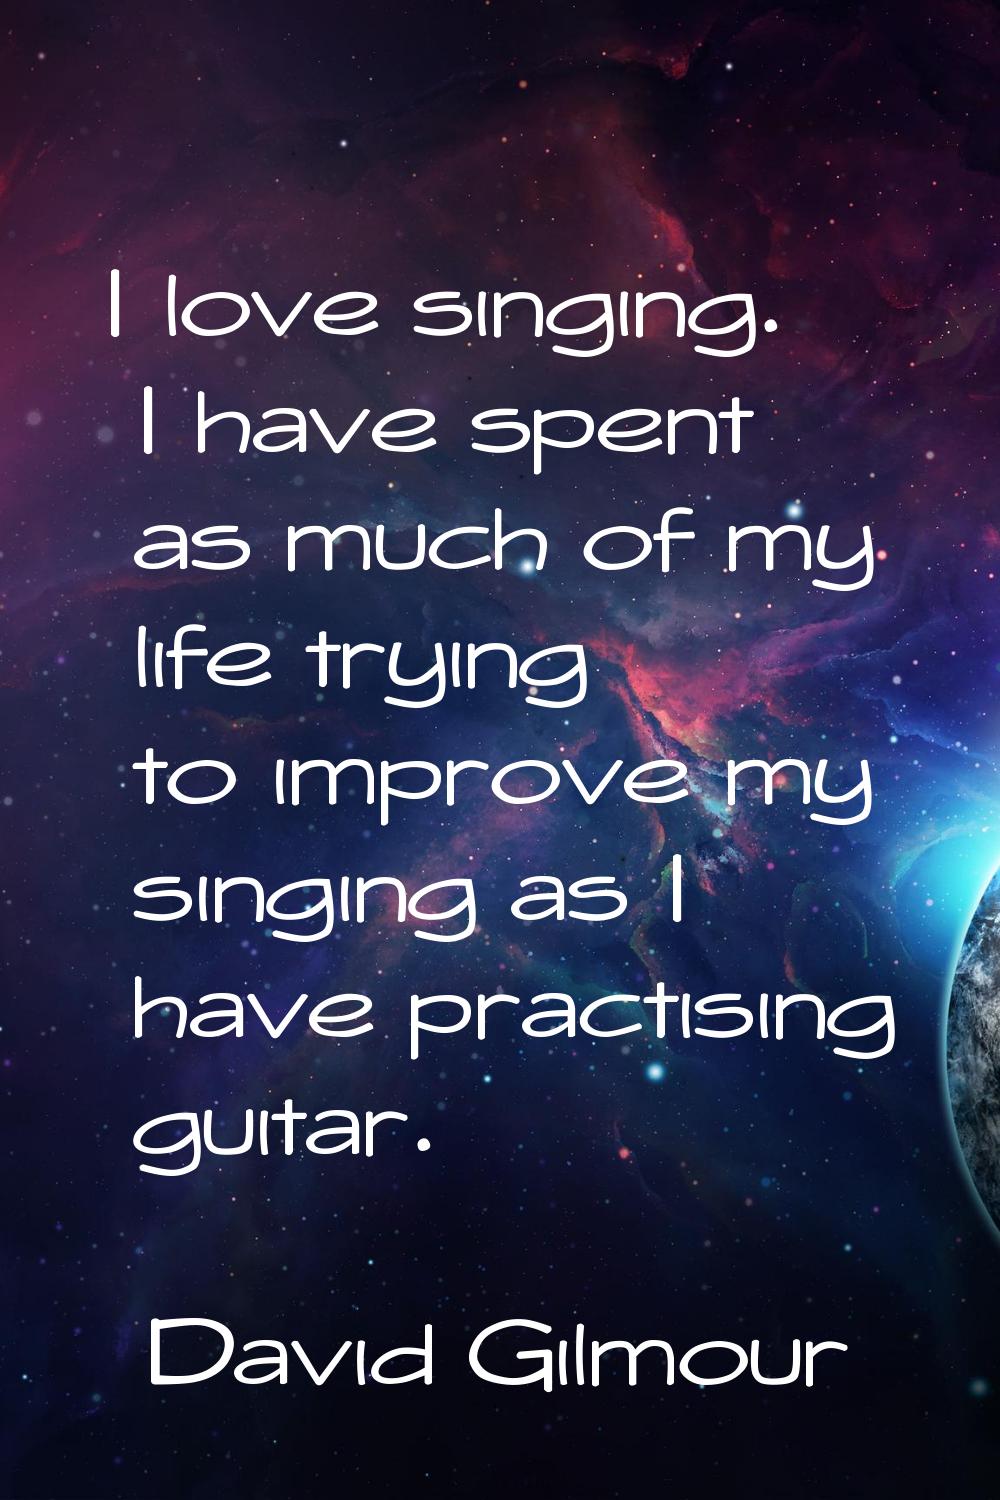 I love singing. I have spent as much of my life trying to improve my singing as I have practising g